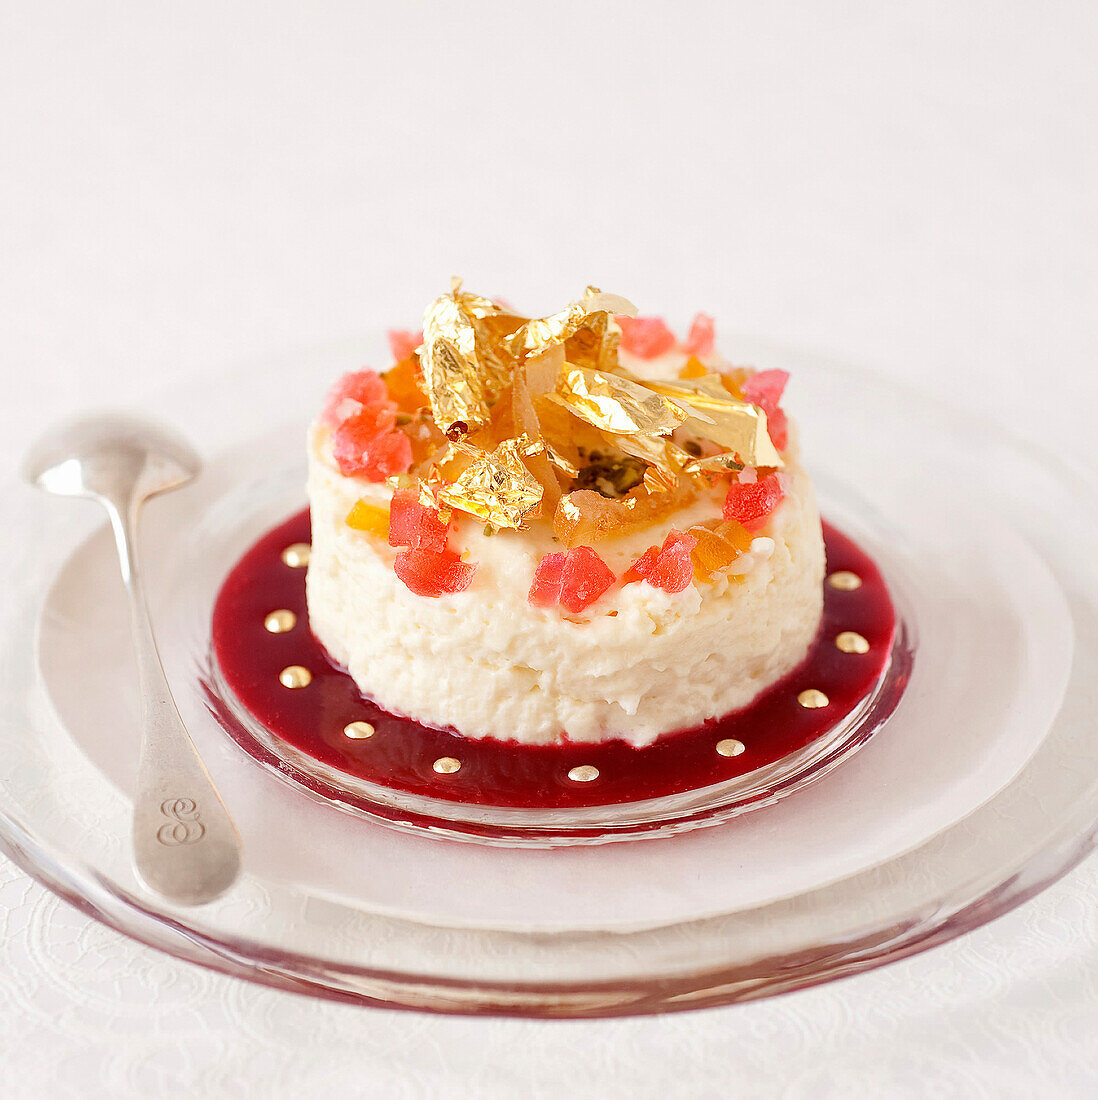 White chocolate mousse decorated with candied fruit and gold flakes,summer fruit puree